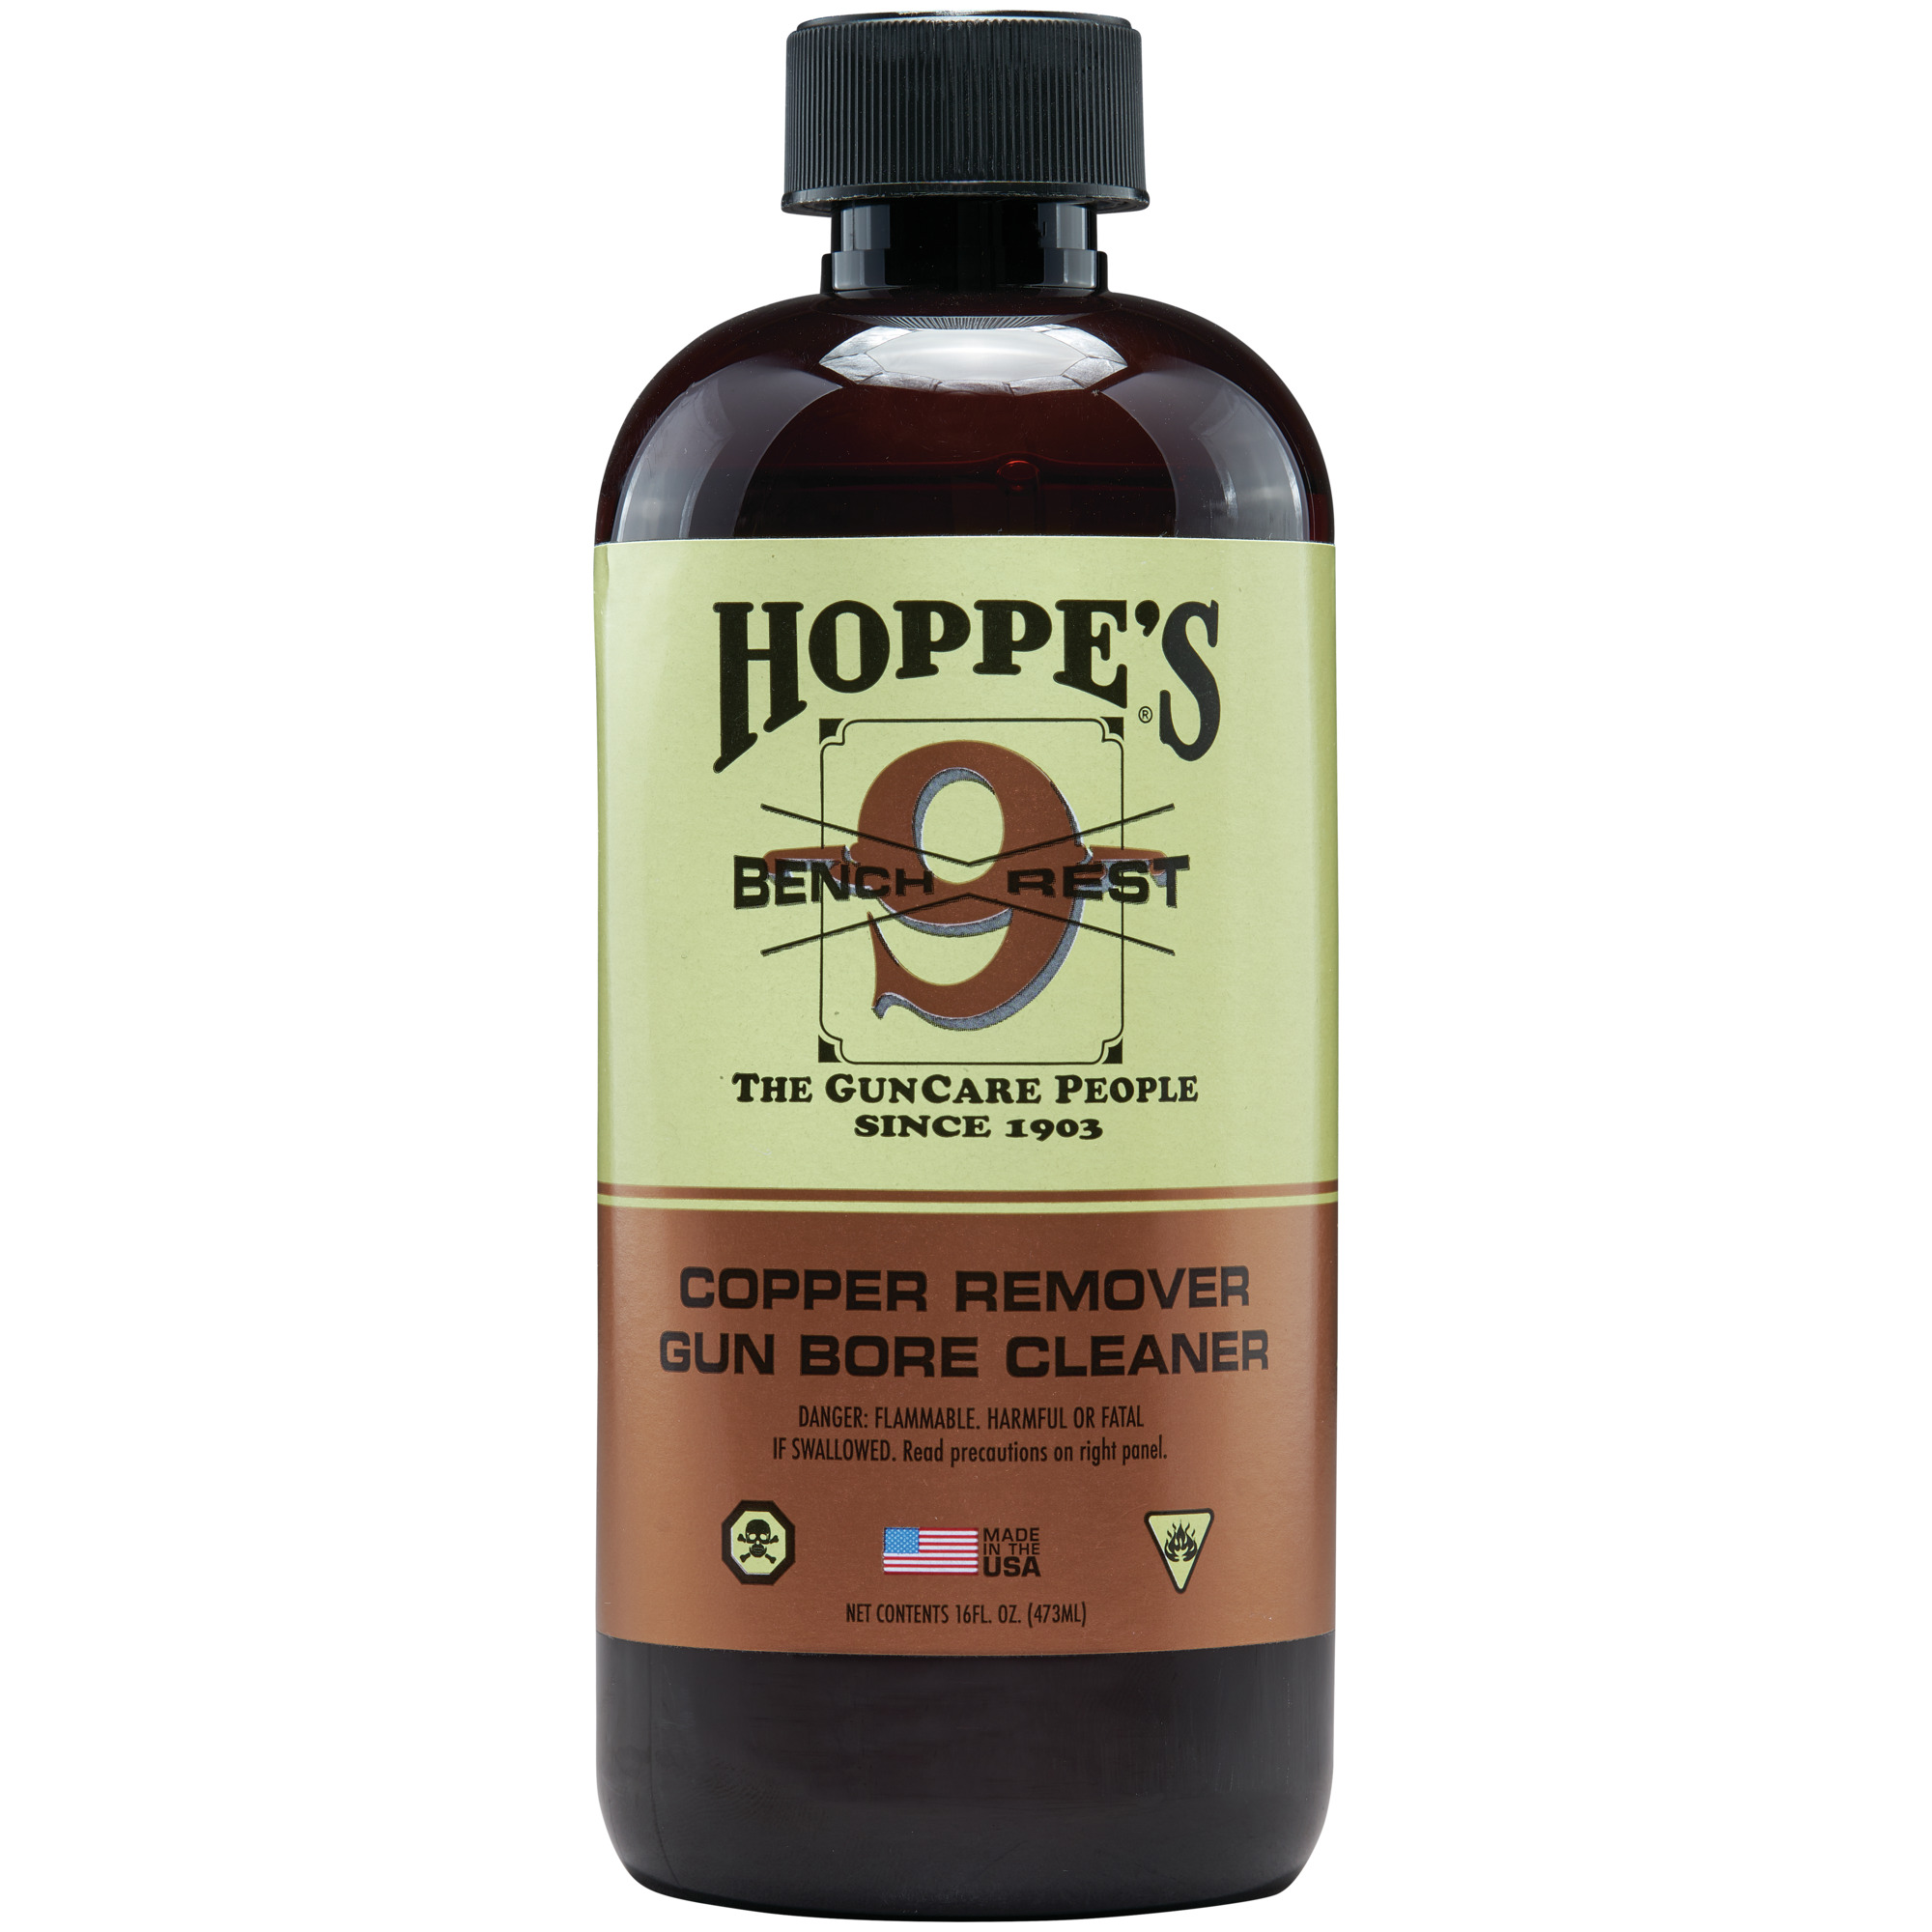 Buy Bench Rest® 9 Copper Gun Bore Cleaner and More | Hoppes